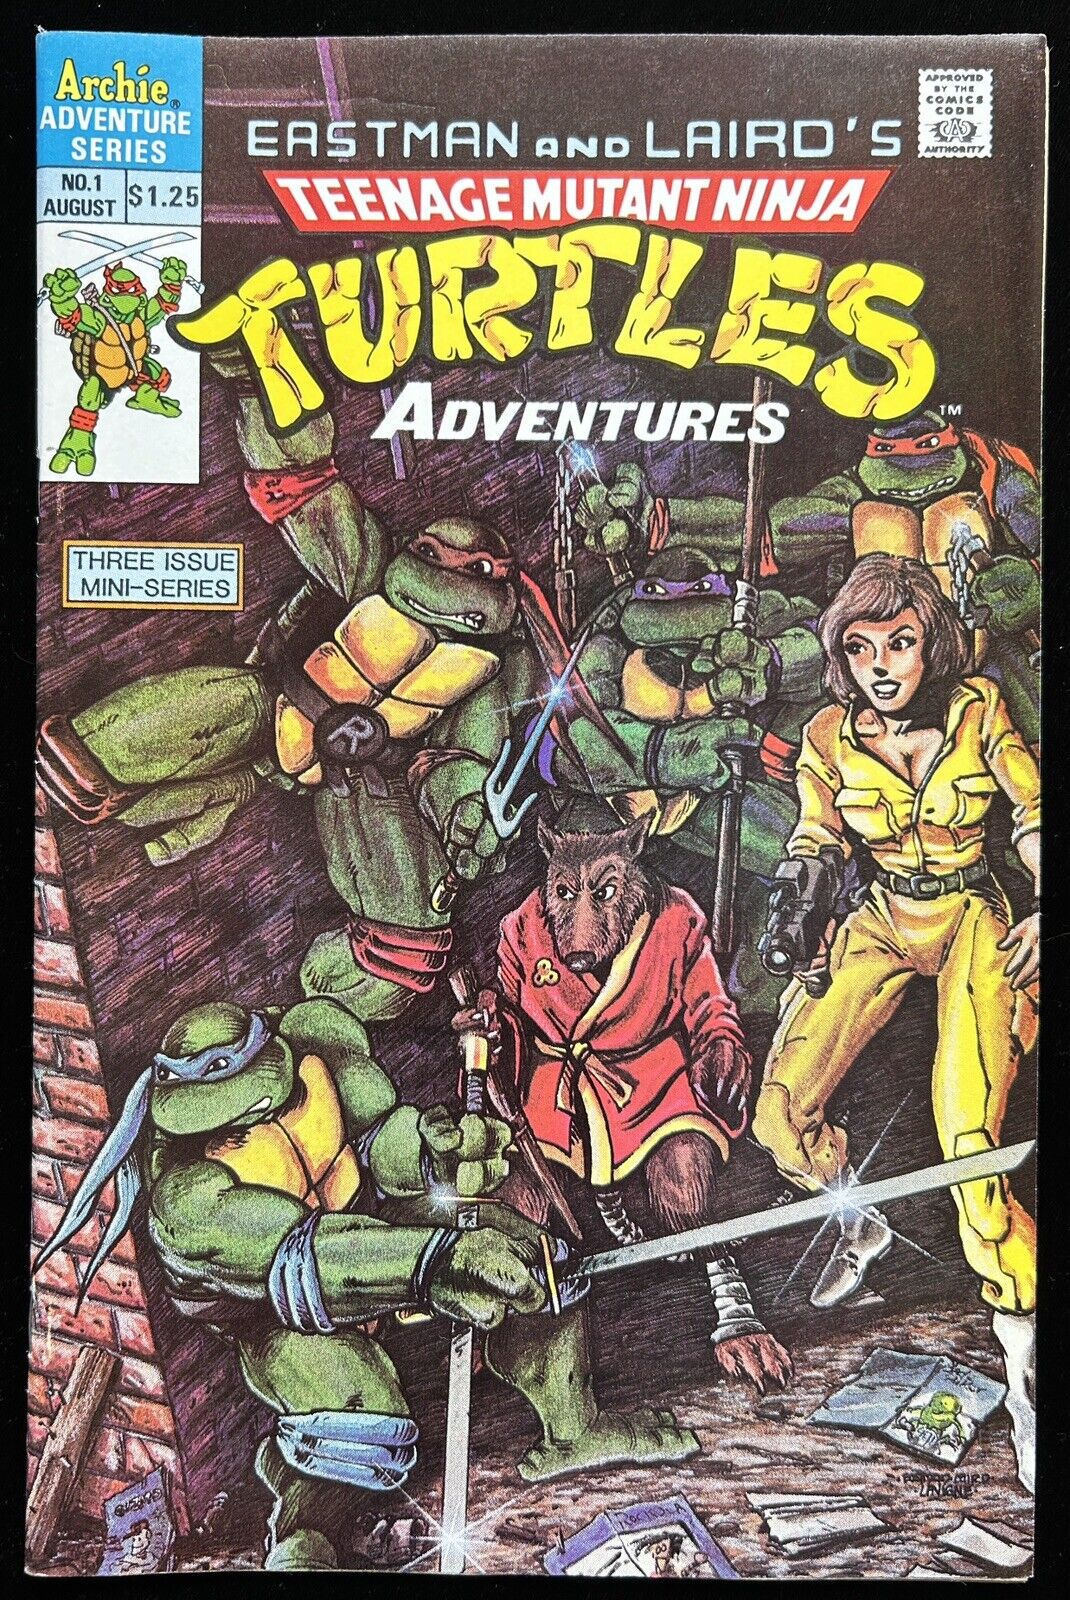 TMNT Adventures #1 (1988) $1.25 Canadian Price Variant CPV VF+ (8.5) Condition